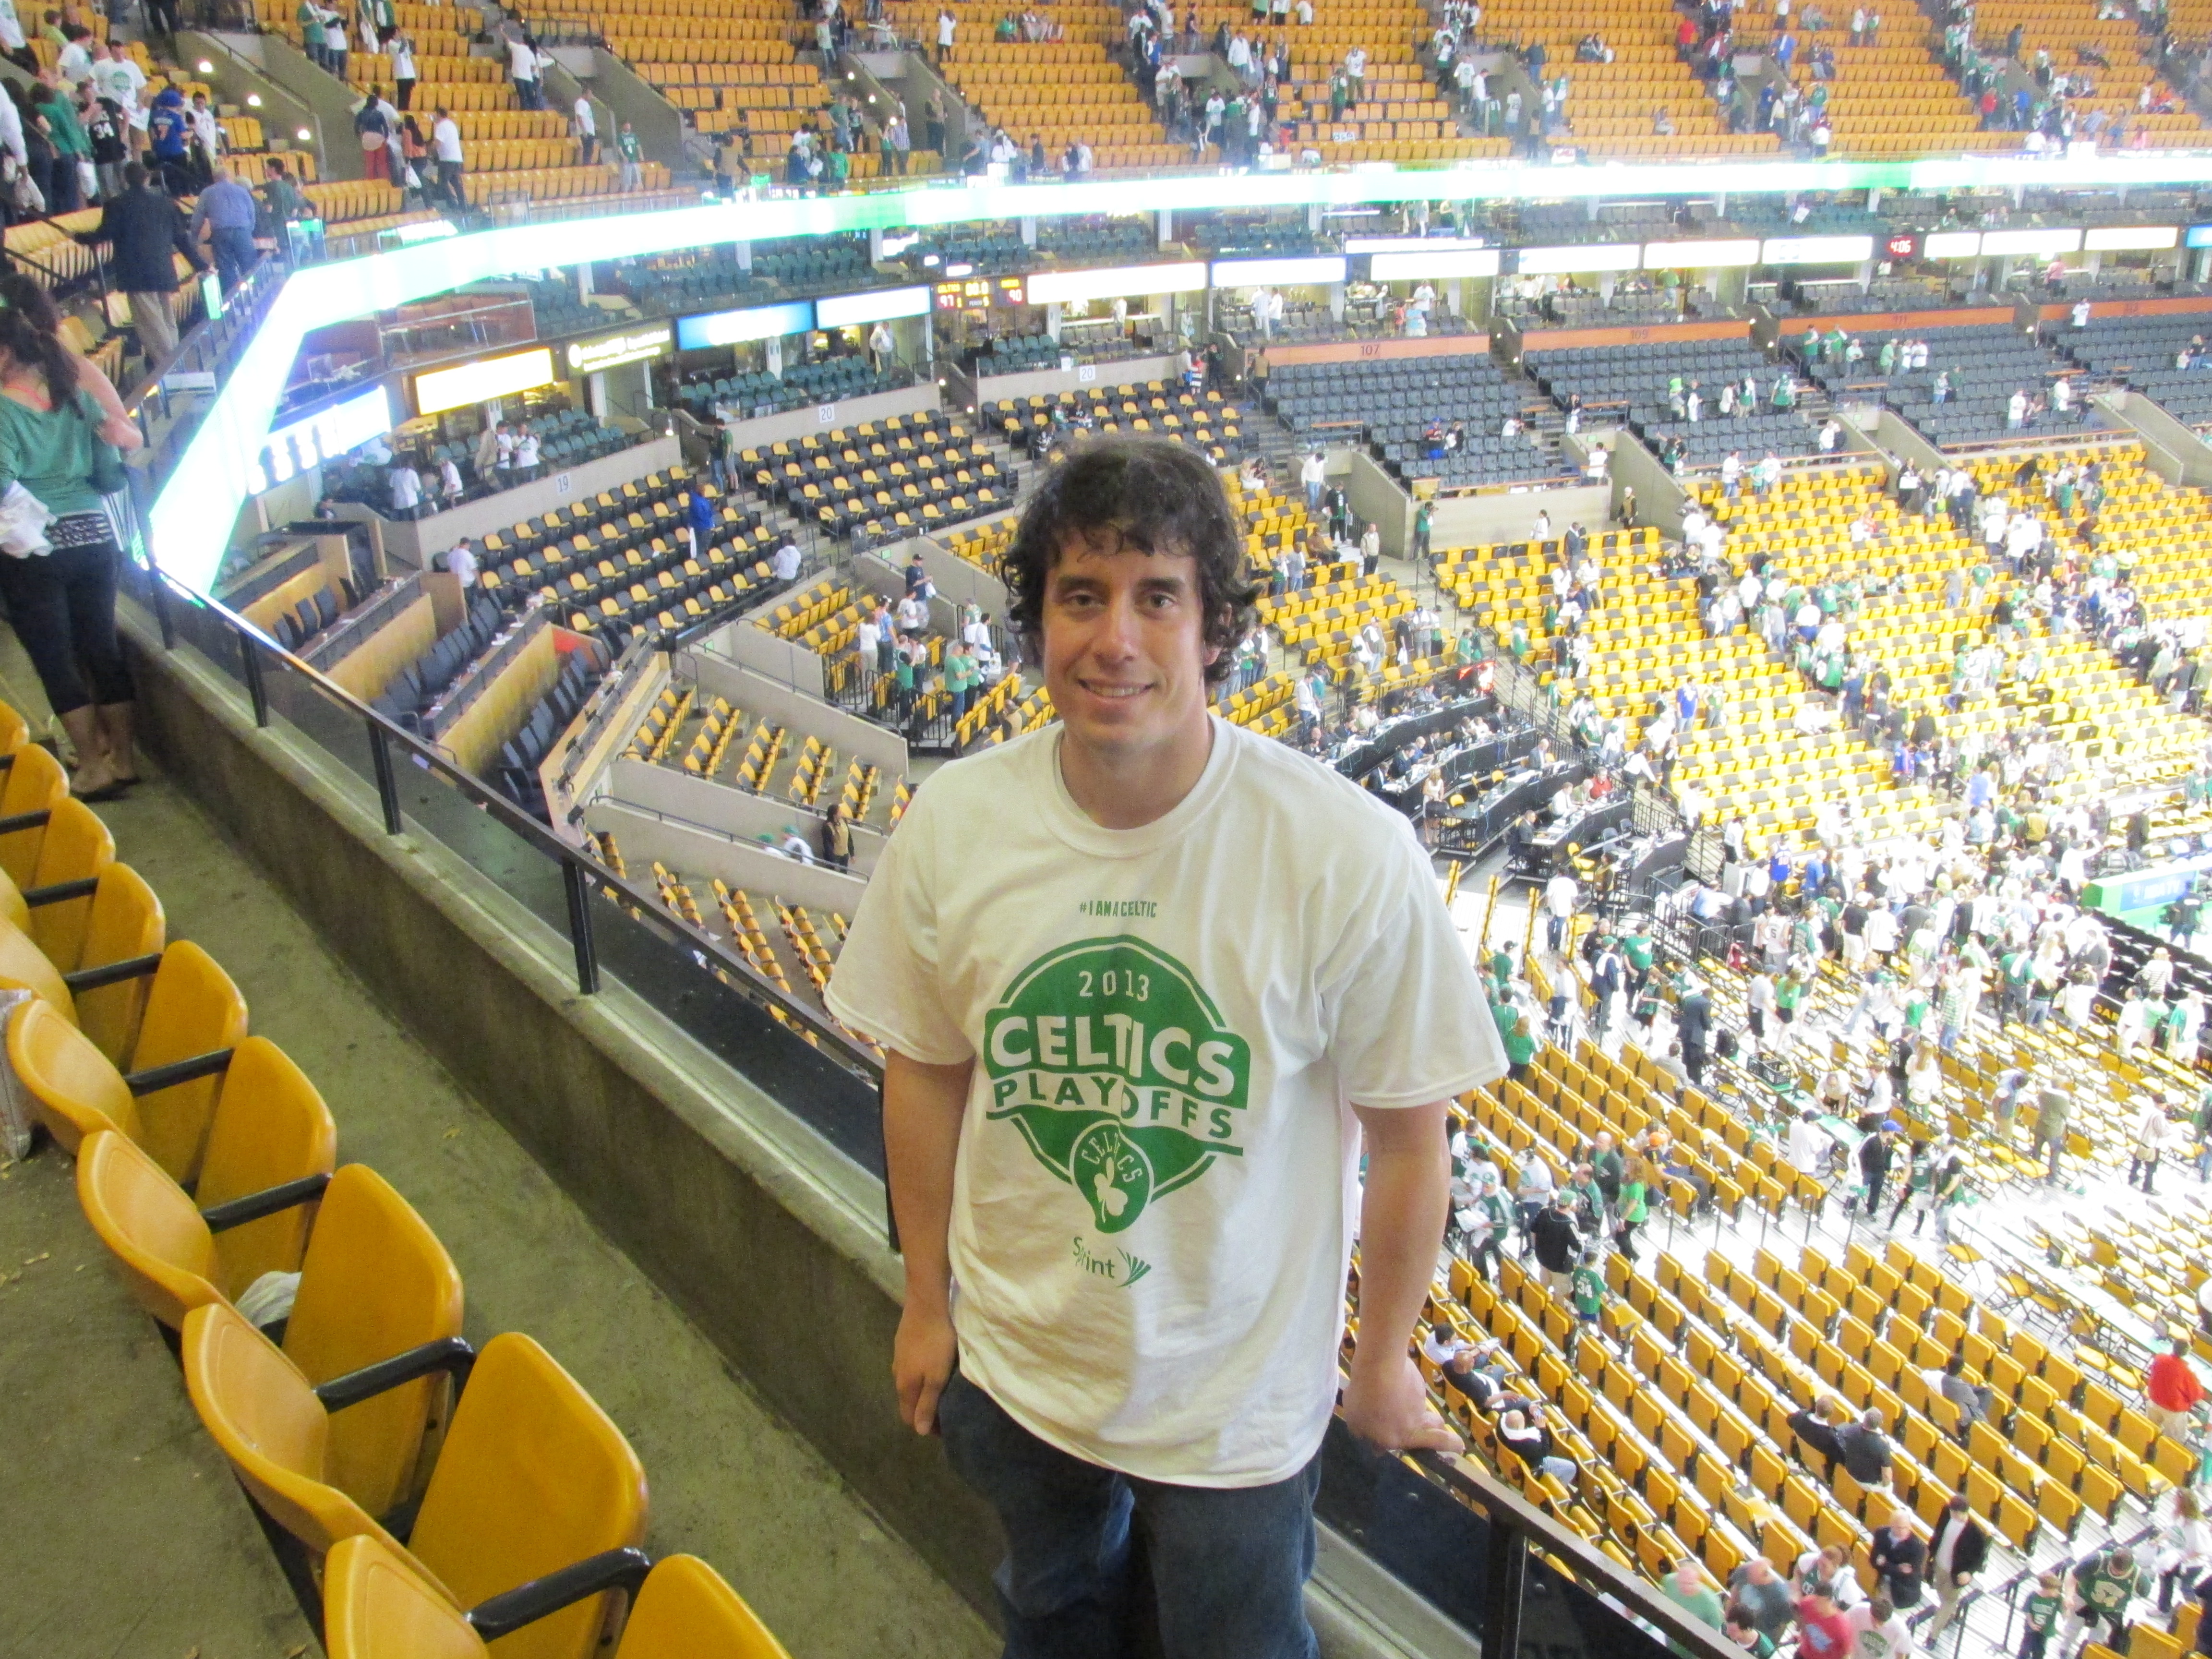 I had a great time cheering on the Celtics to a playoff victory.